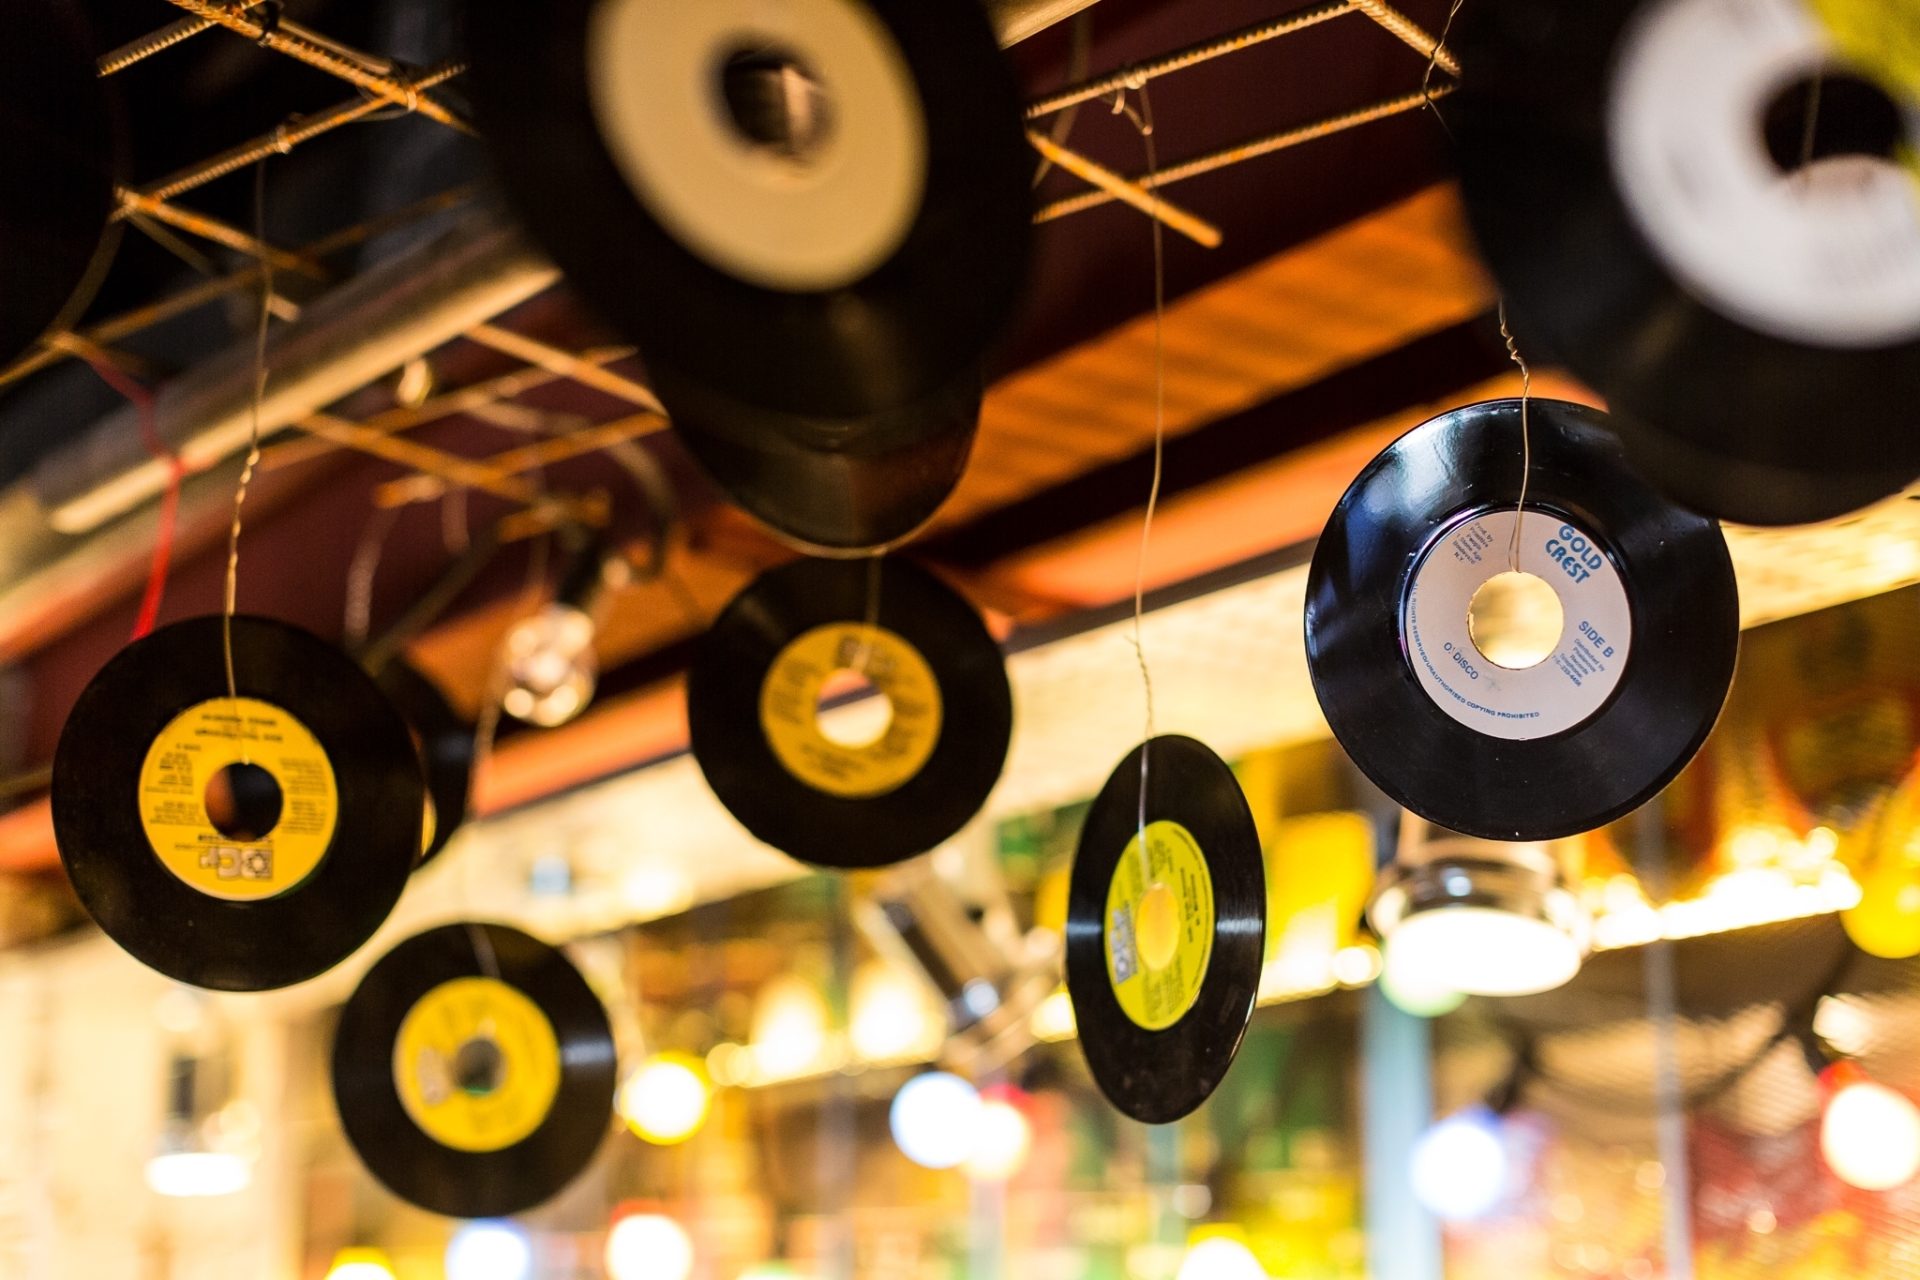 Turtle Bay Derby interior decor with hanging records